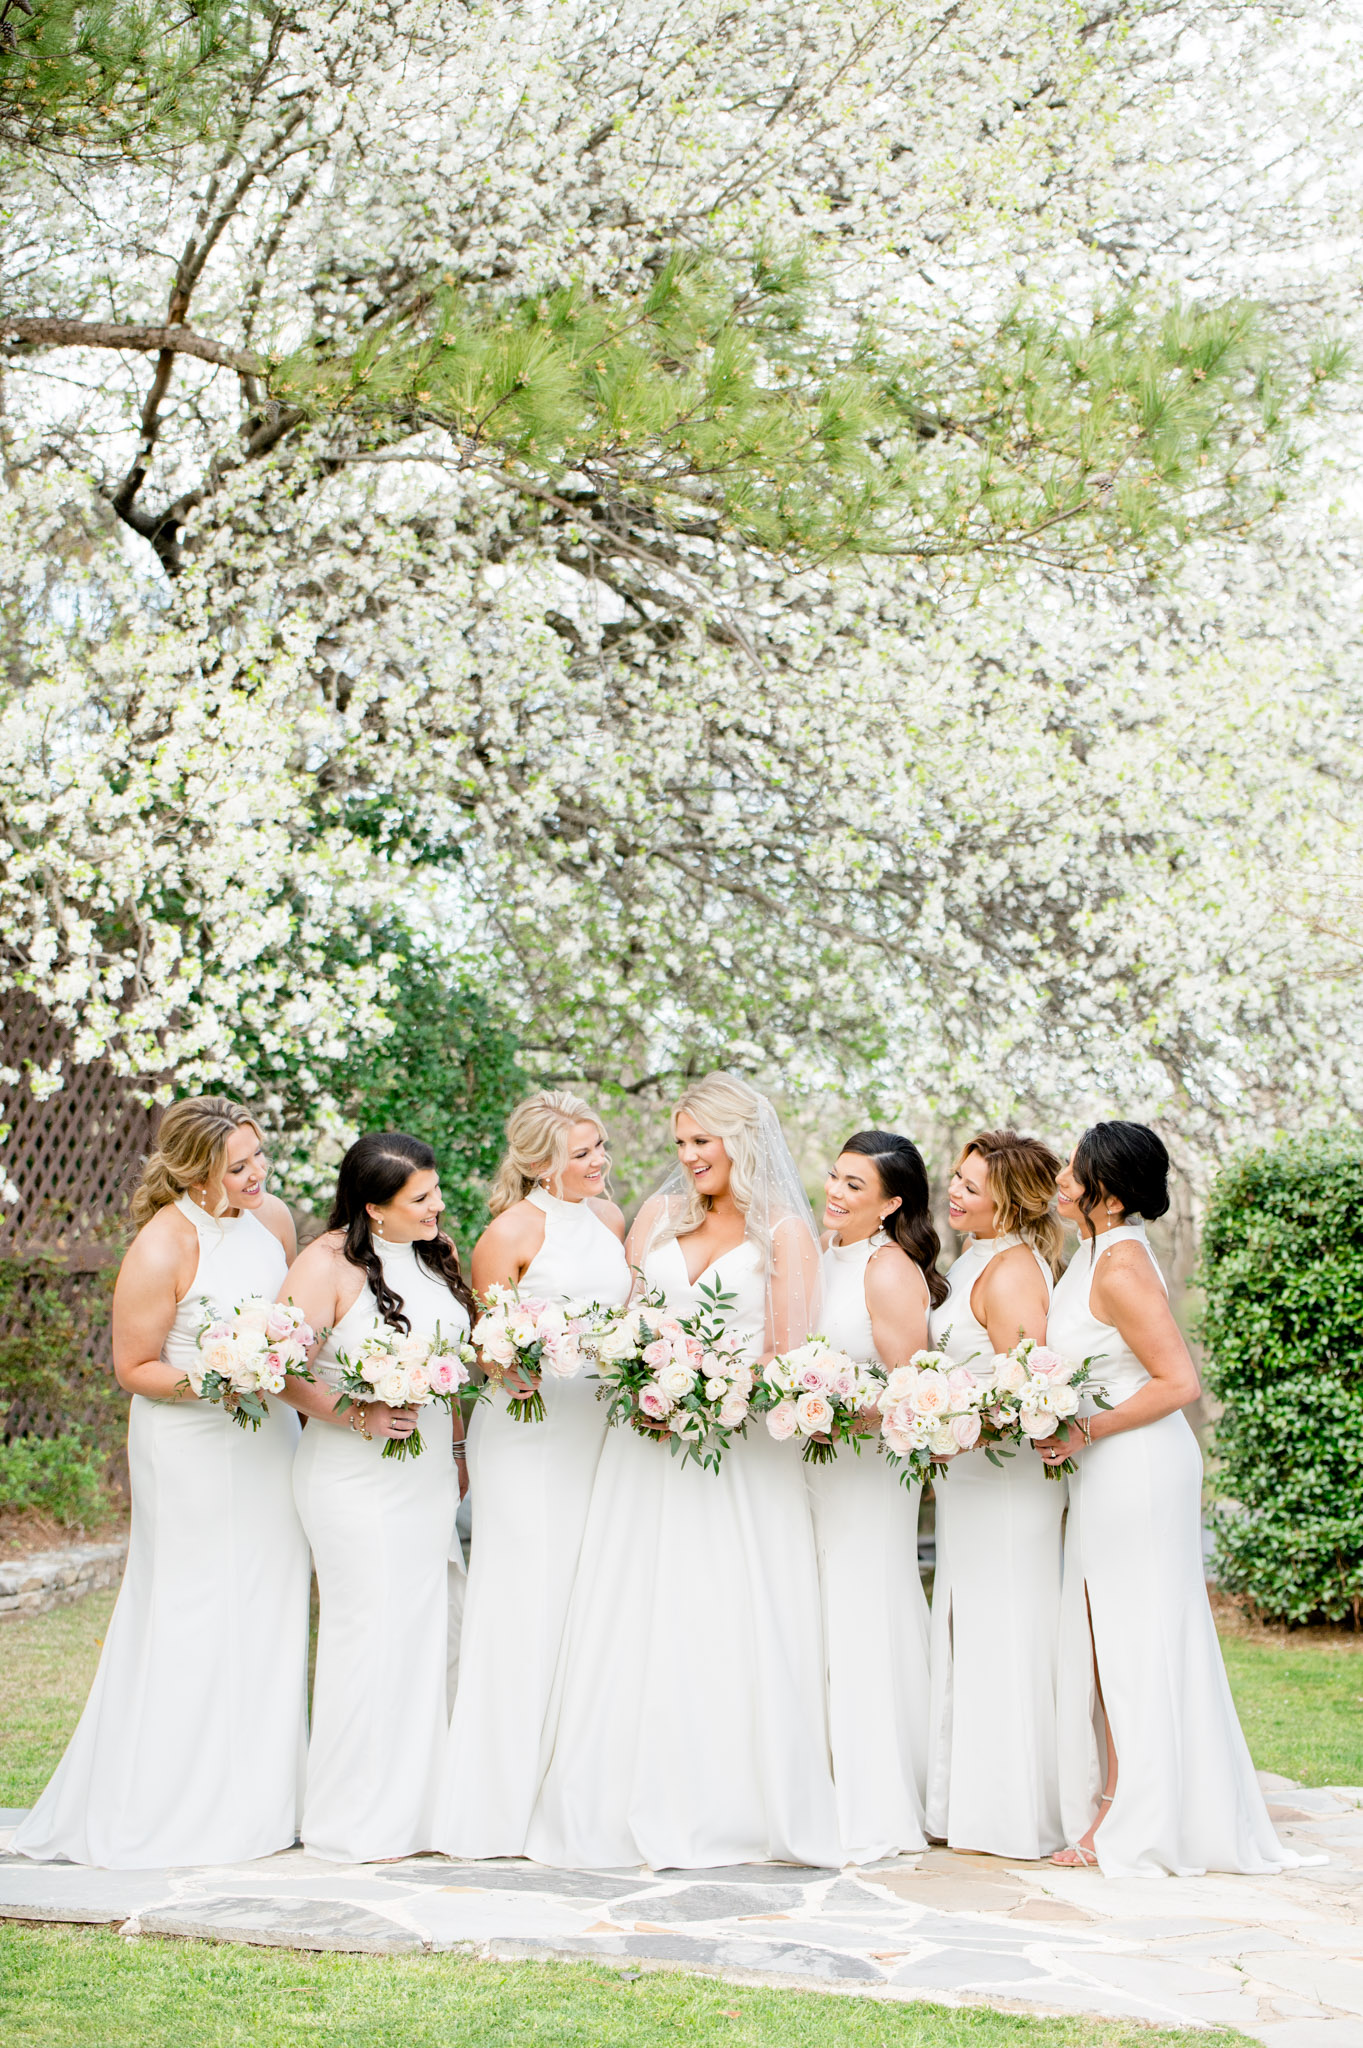 Bride and bridesmaids laugh under blooming dogwood tree.